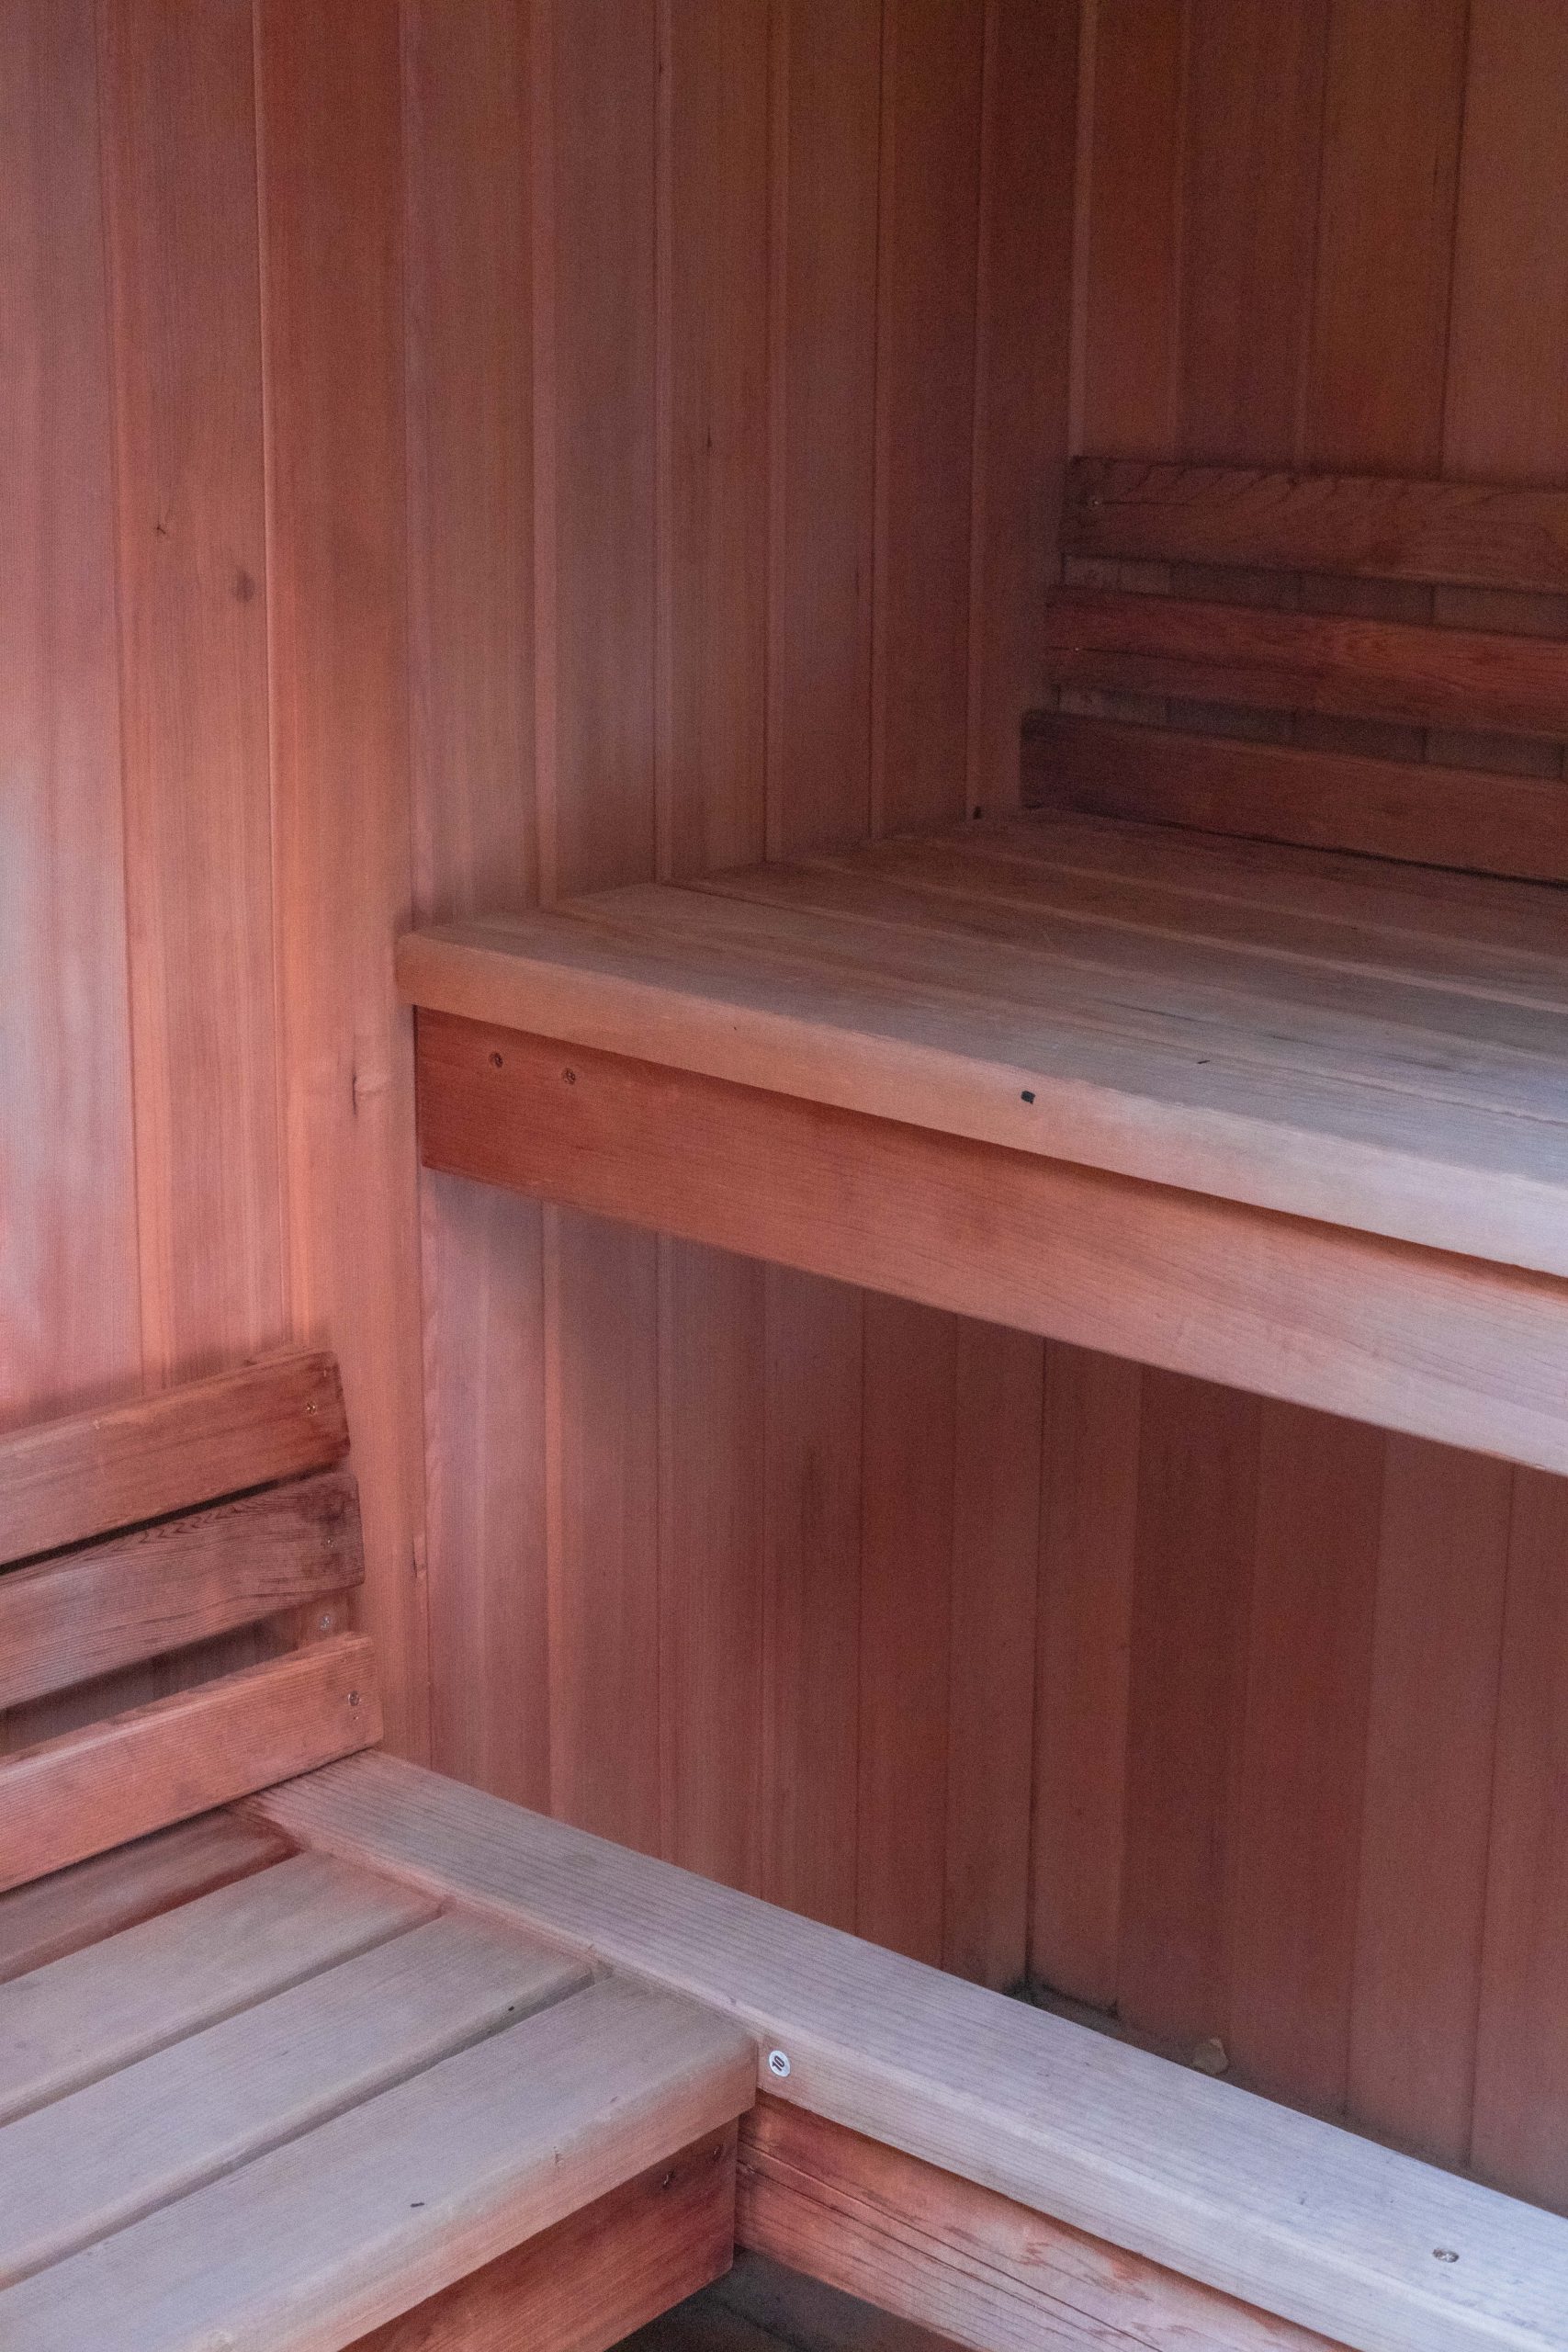 The sauna at the Loch Tay highland lodges